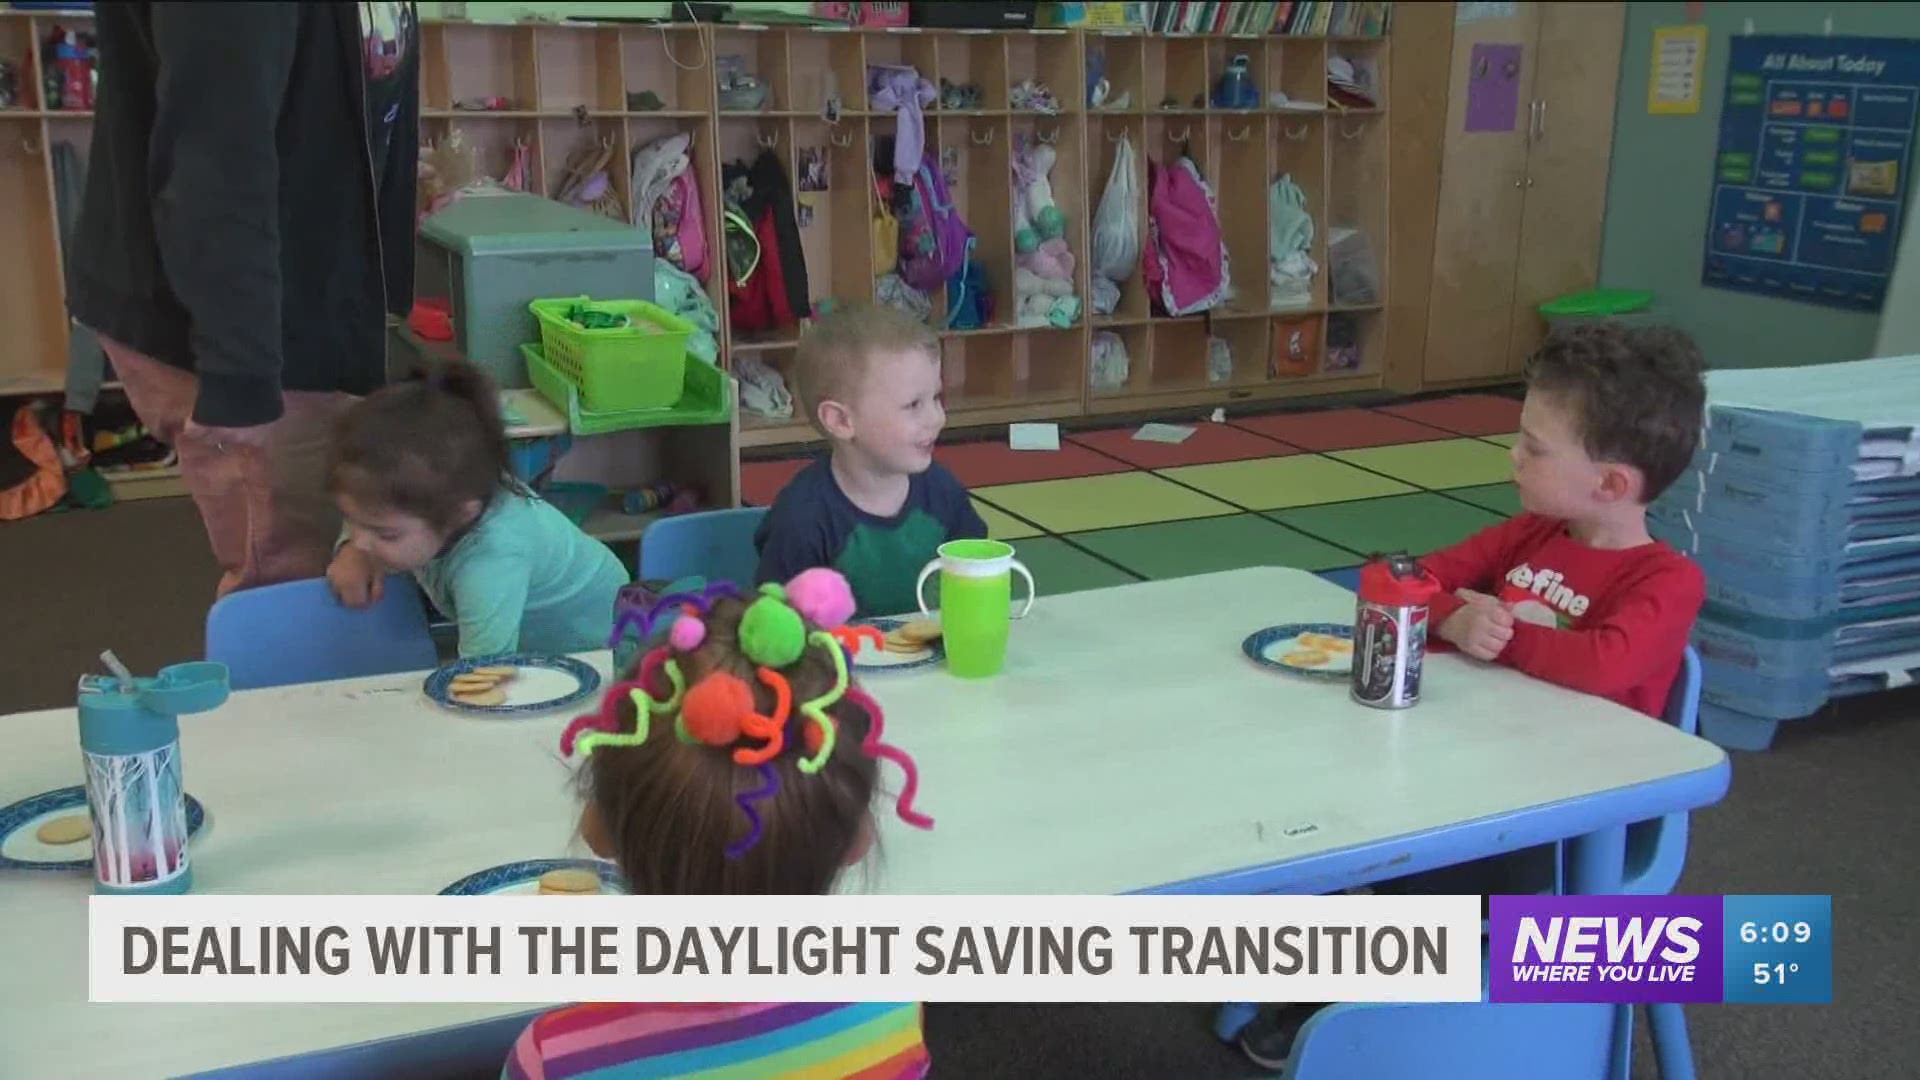 How parents and kids are dealing with losing an hour of sleep during Daylight Savings.